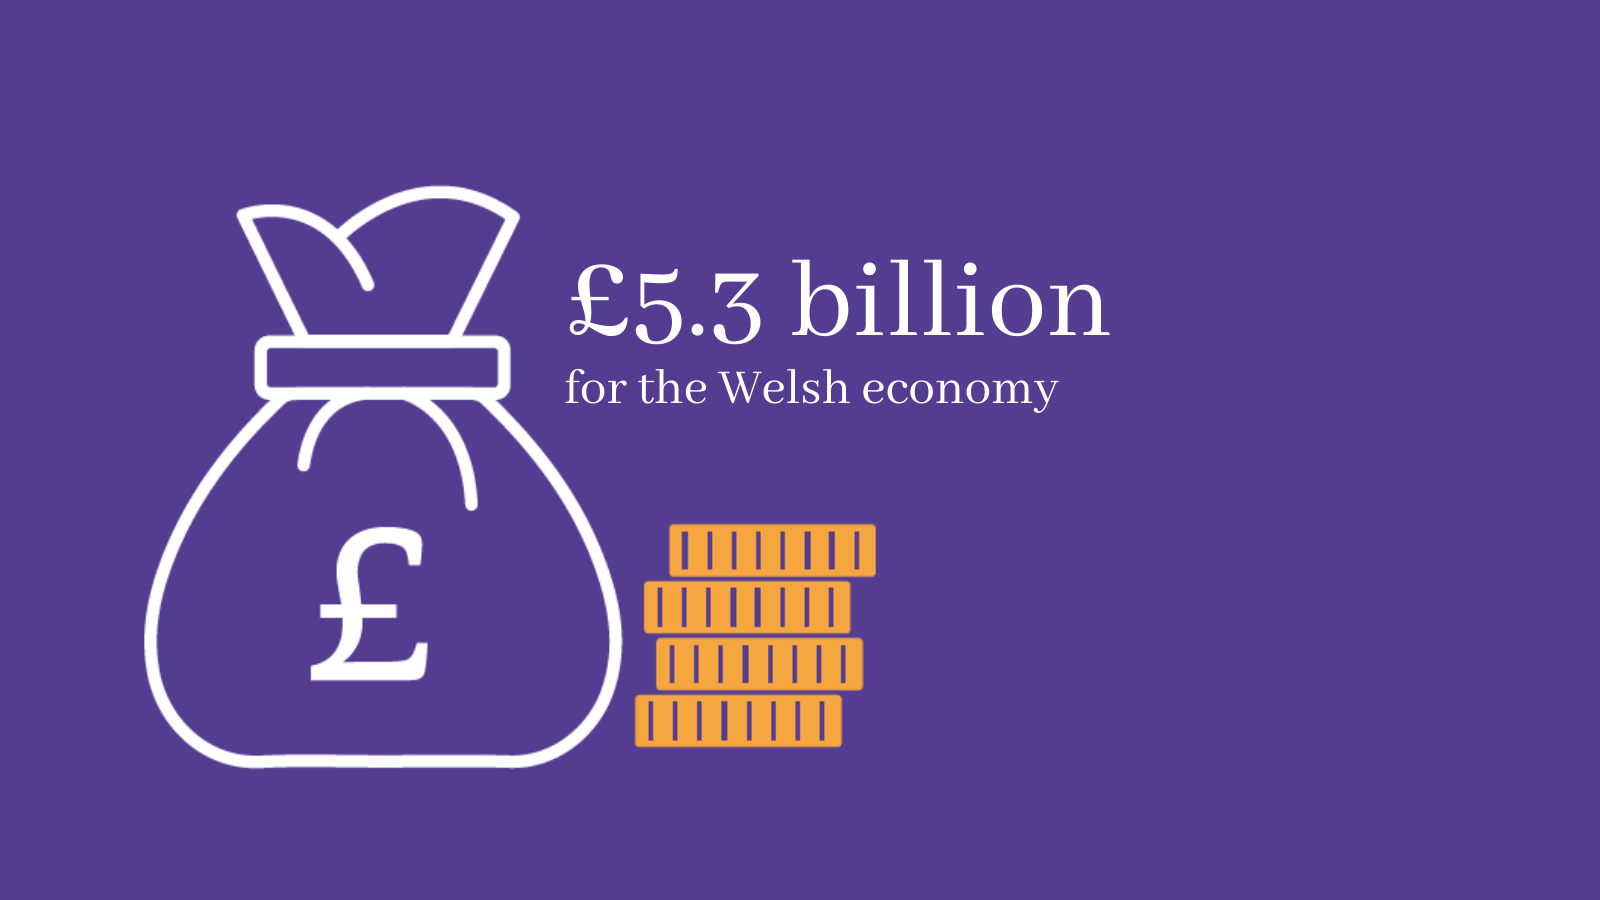 Purple infographic with moneybag and text saying £5.3 billion for the Welsh economy